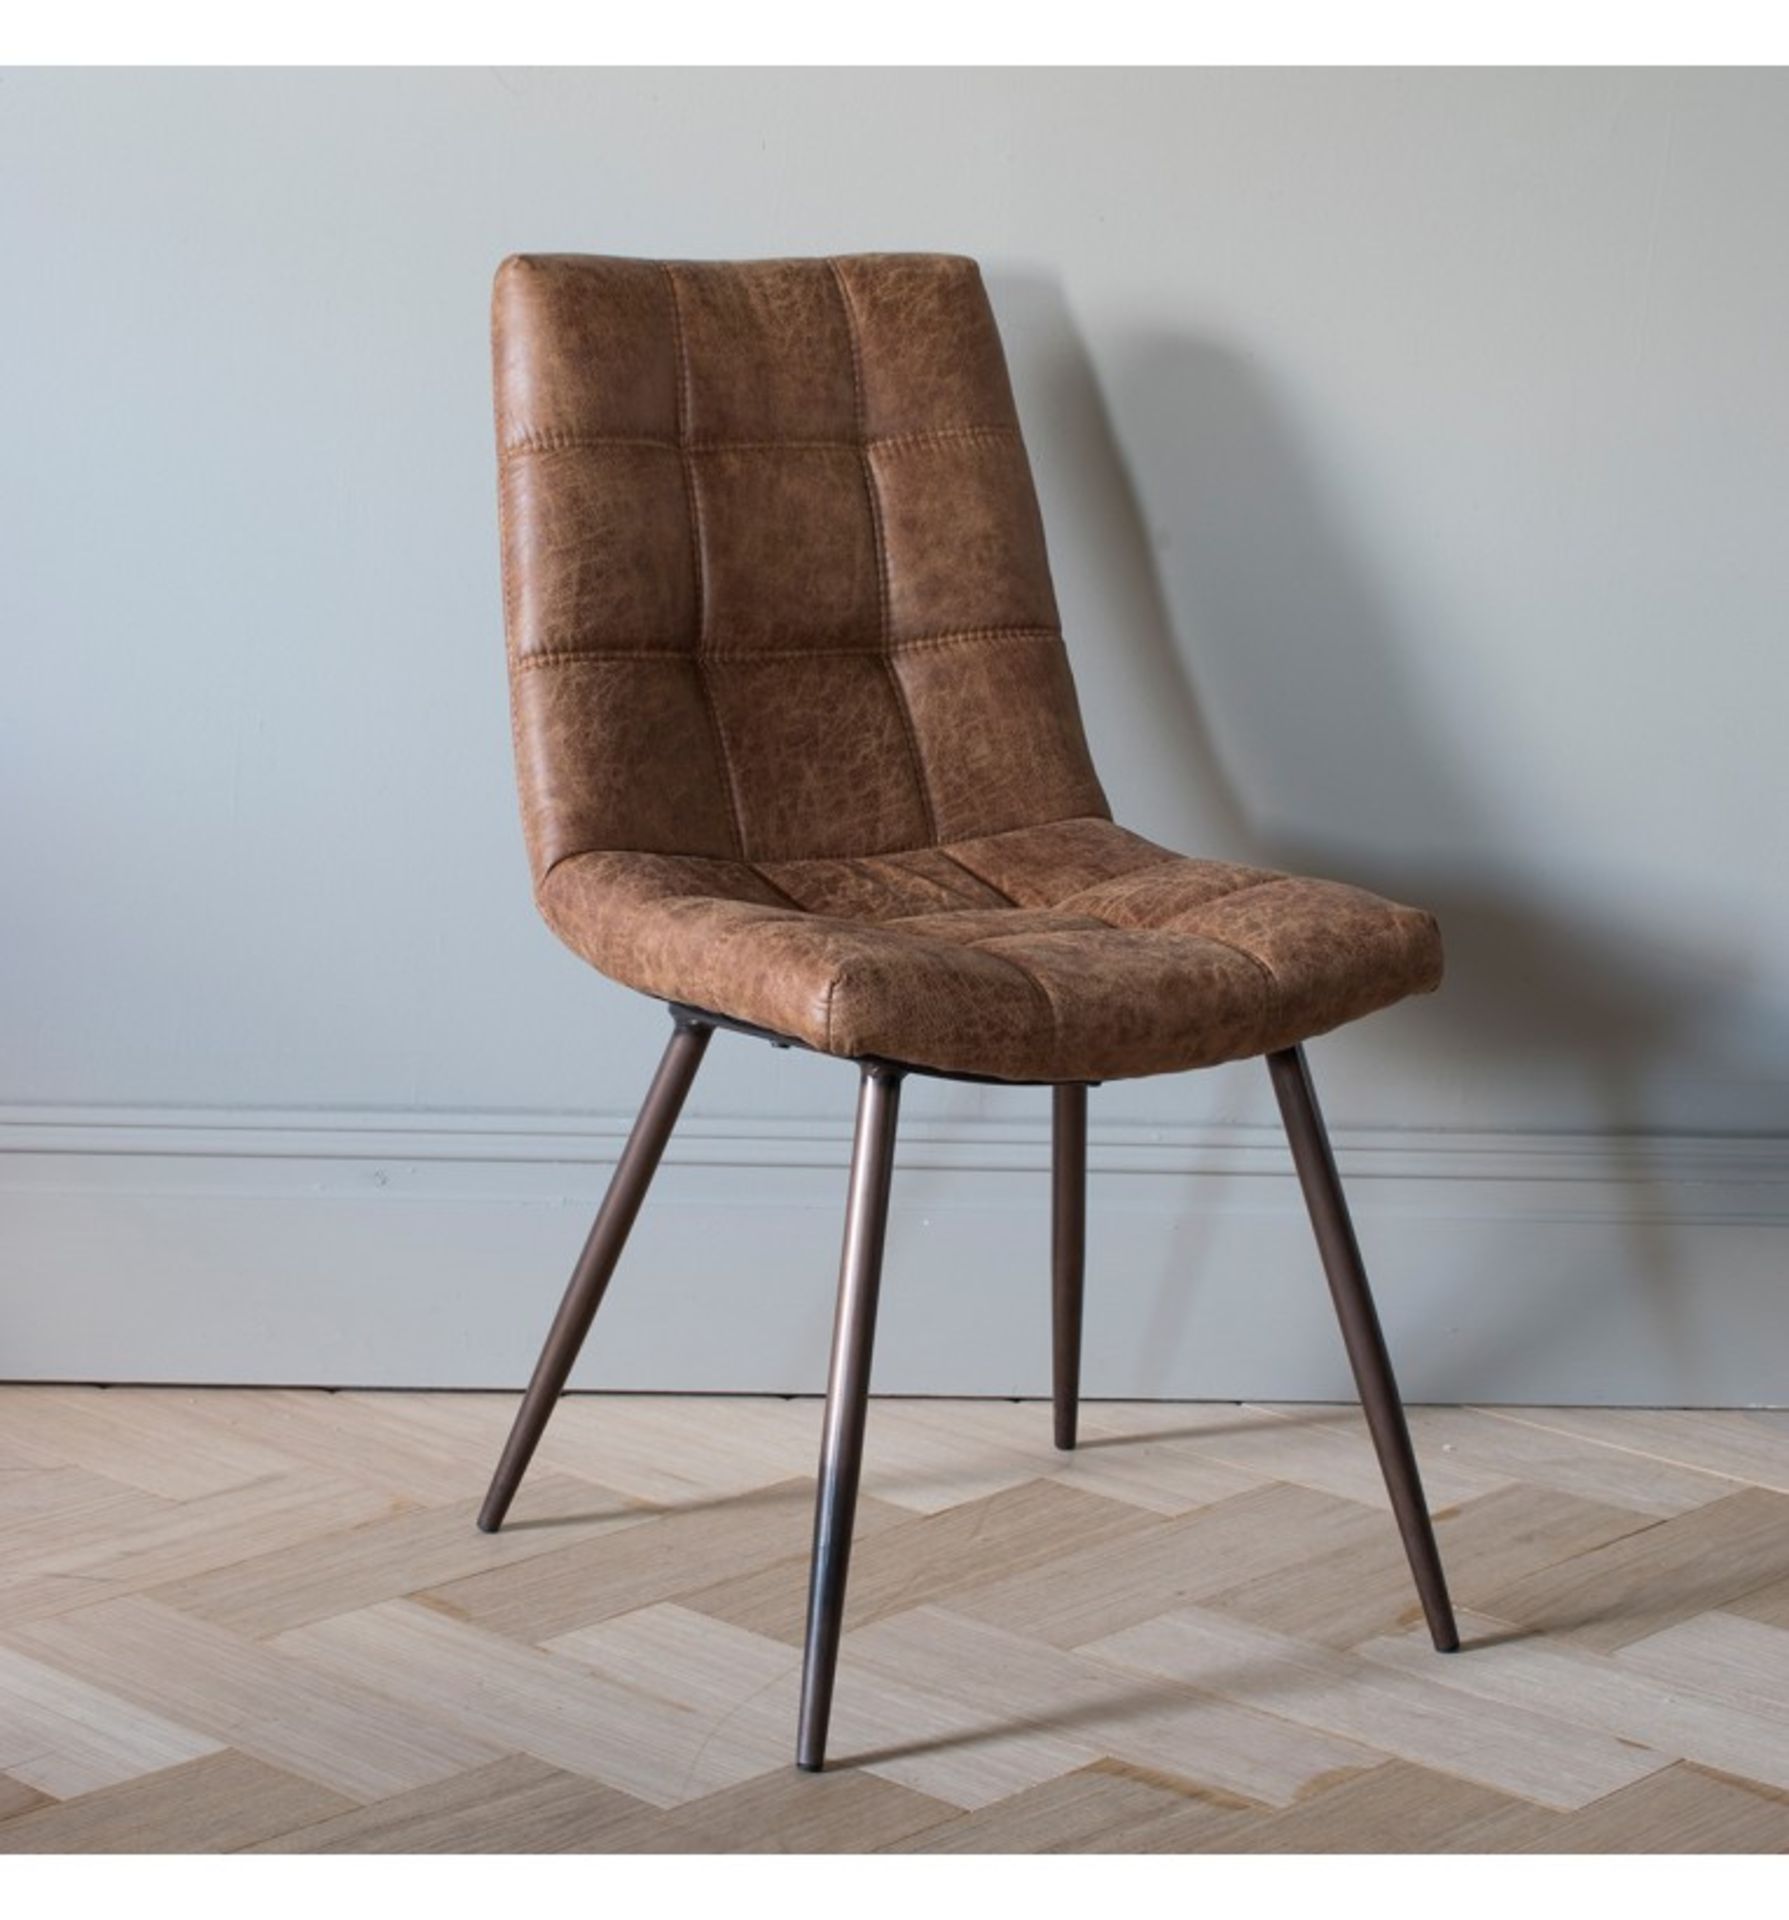 Darwin Brown Dining Chair (2pk) We are very proud to introduce this gorgeous but simple Darwin